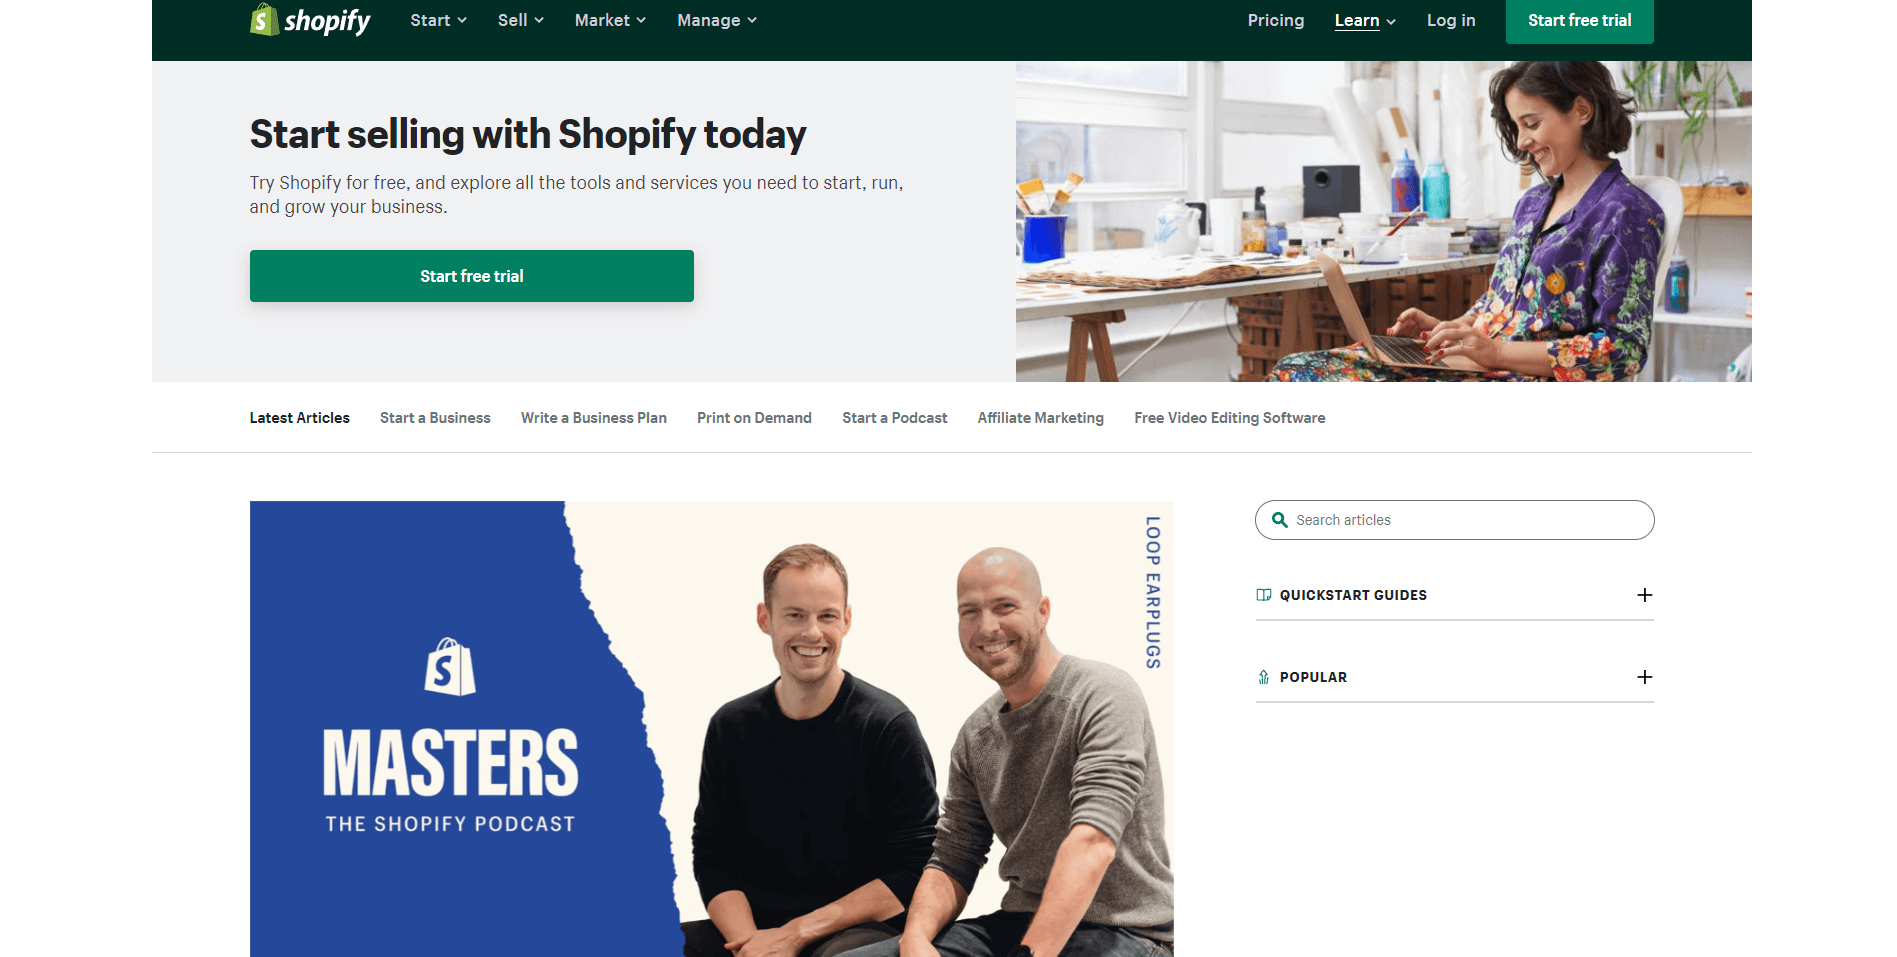 Shopify Masters